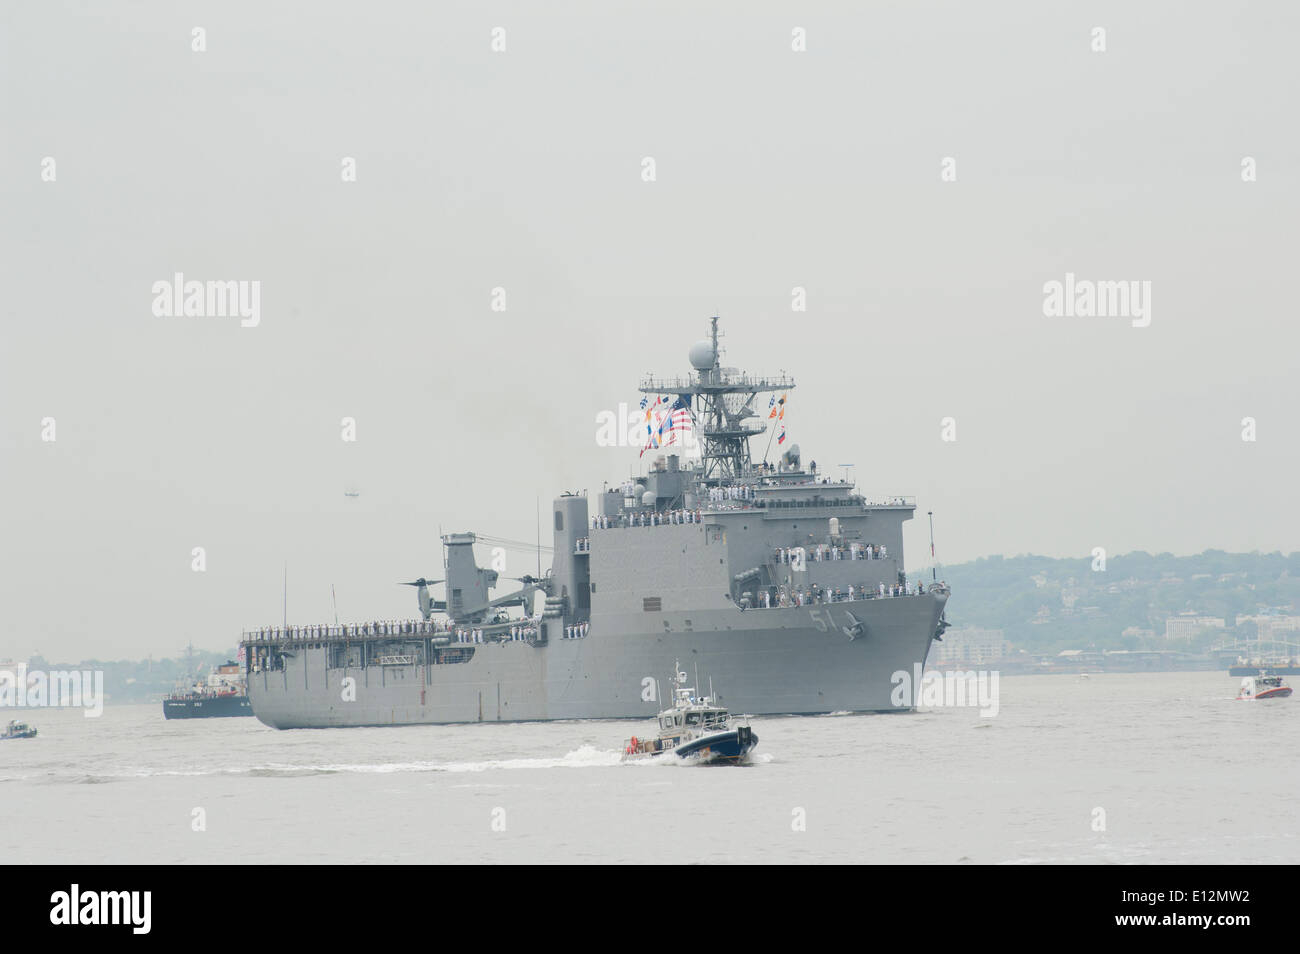 New York, NY — May 21, 2014. The USS Oak Hill (LSD-51), an amphibious ship carrying both U.S. Navy and U.S. Marine personnel, arrived in New York harbor on May 21, 2014 at the start of Fleet Week. The USS Oak Hill was commissioned in June 1996 and has served in the Mediterranean Sea, the Persian Gulf and on the Horn of Africa. Fleet Week brings around 1,500 sailors, marines and U.S. Coast Guardsmen to New York City, with ship tours, aerial demonstrations and parades. (© Terese Loeb Kreuzer 2014) Credit:  Terese Loeb Kreuzer/Alamy Live News Stock Photo